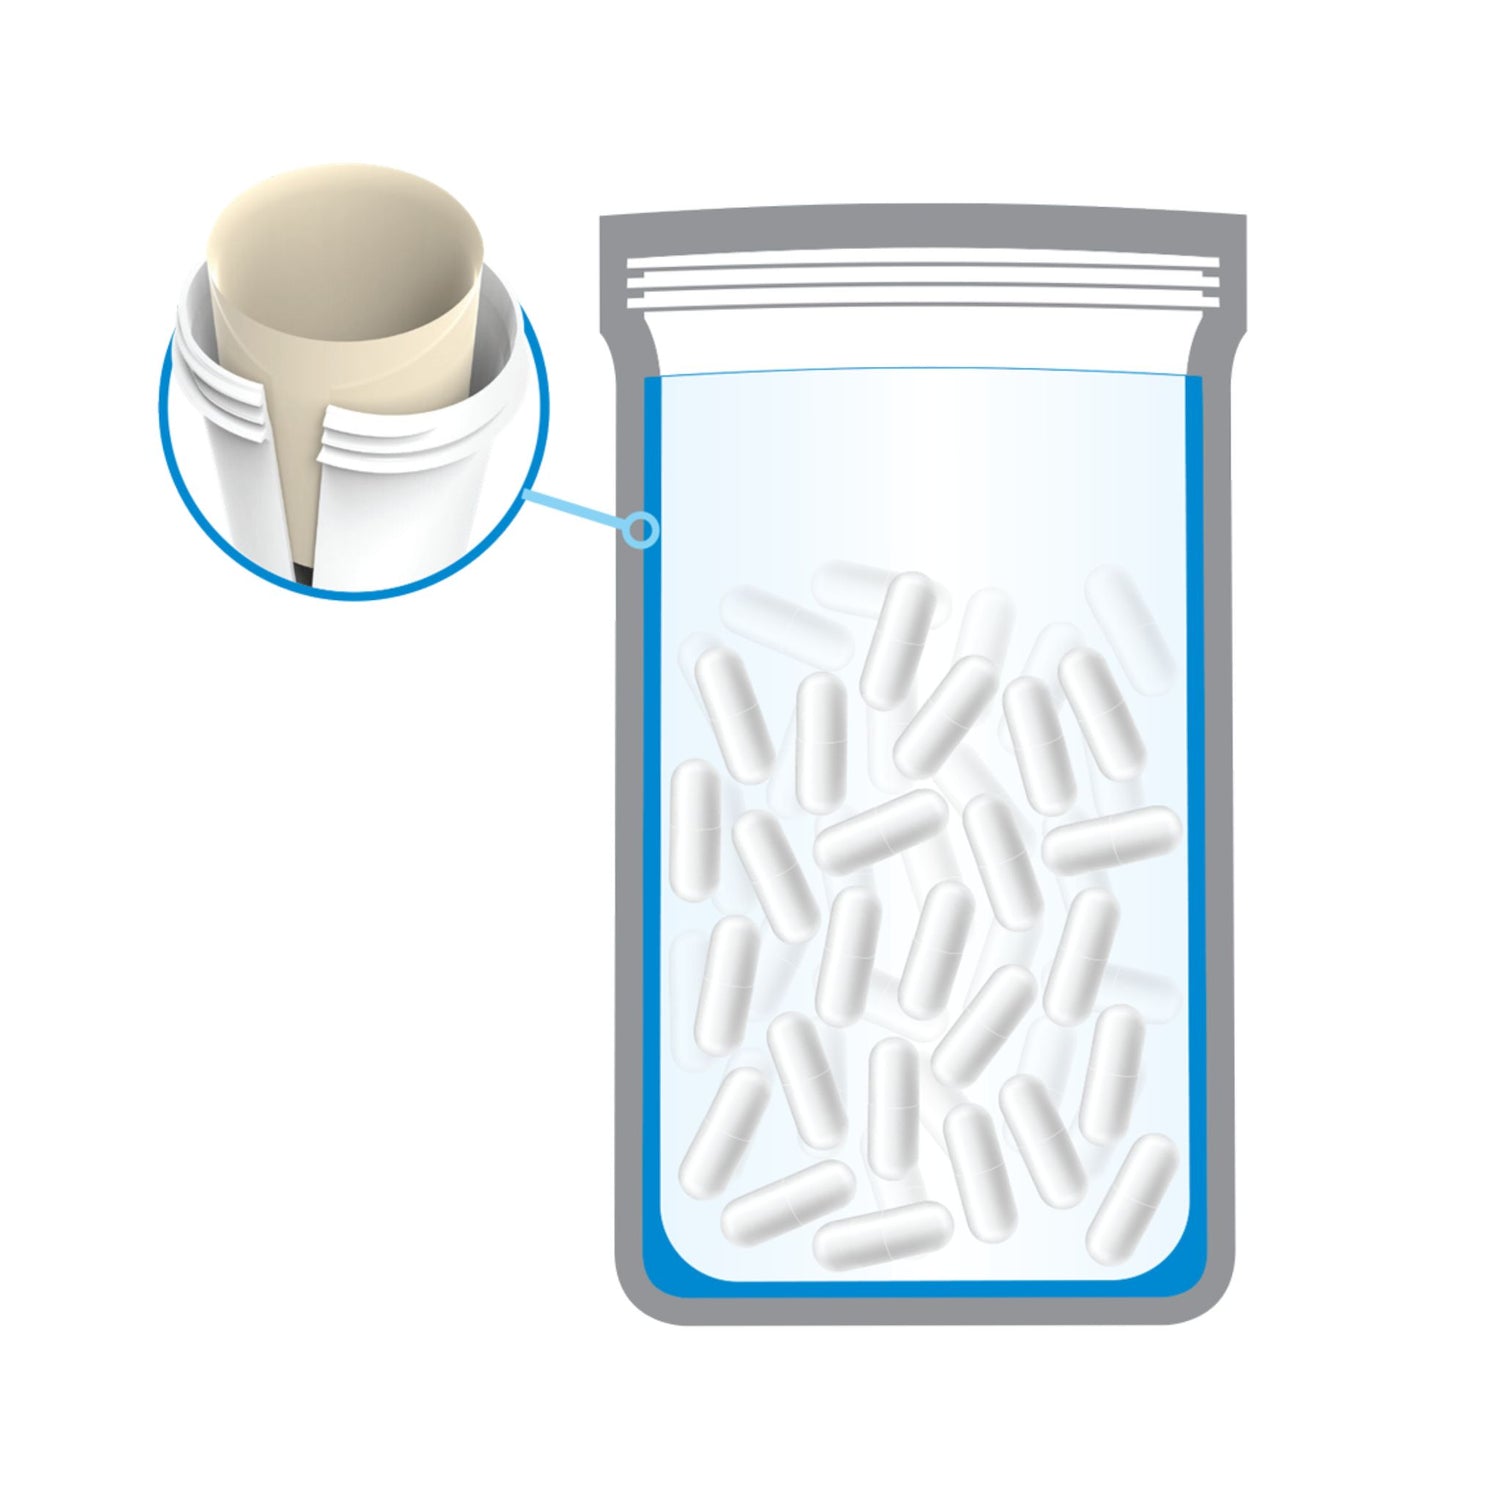 Inner Health Activ-Vial Packaging Diagram - Showcasing leading technology of bottle lining which helps to maintain active probiotics until expiry when designed for shelf and not refrigerated